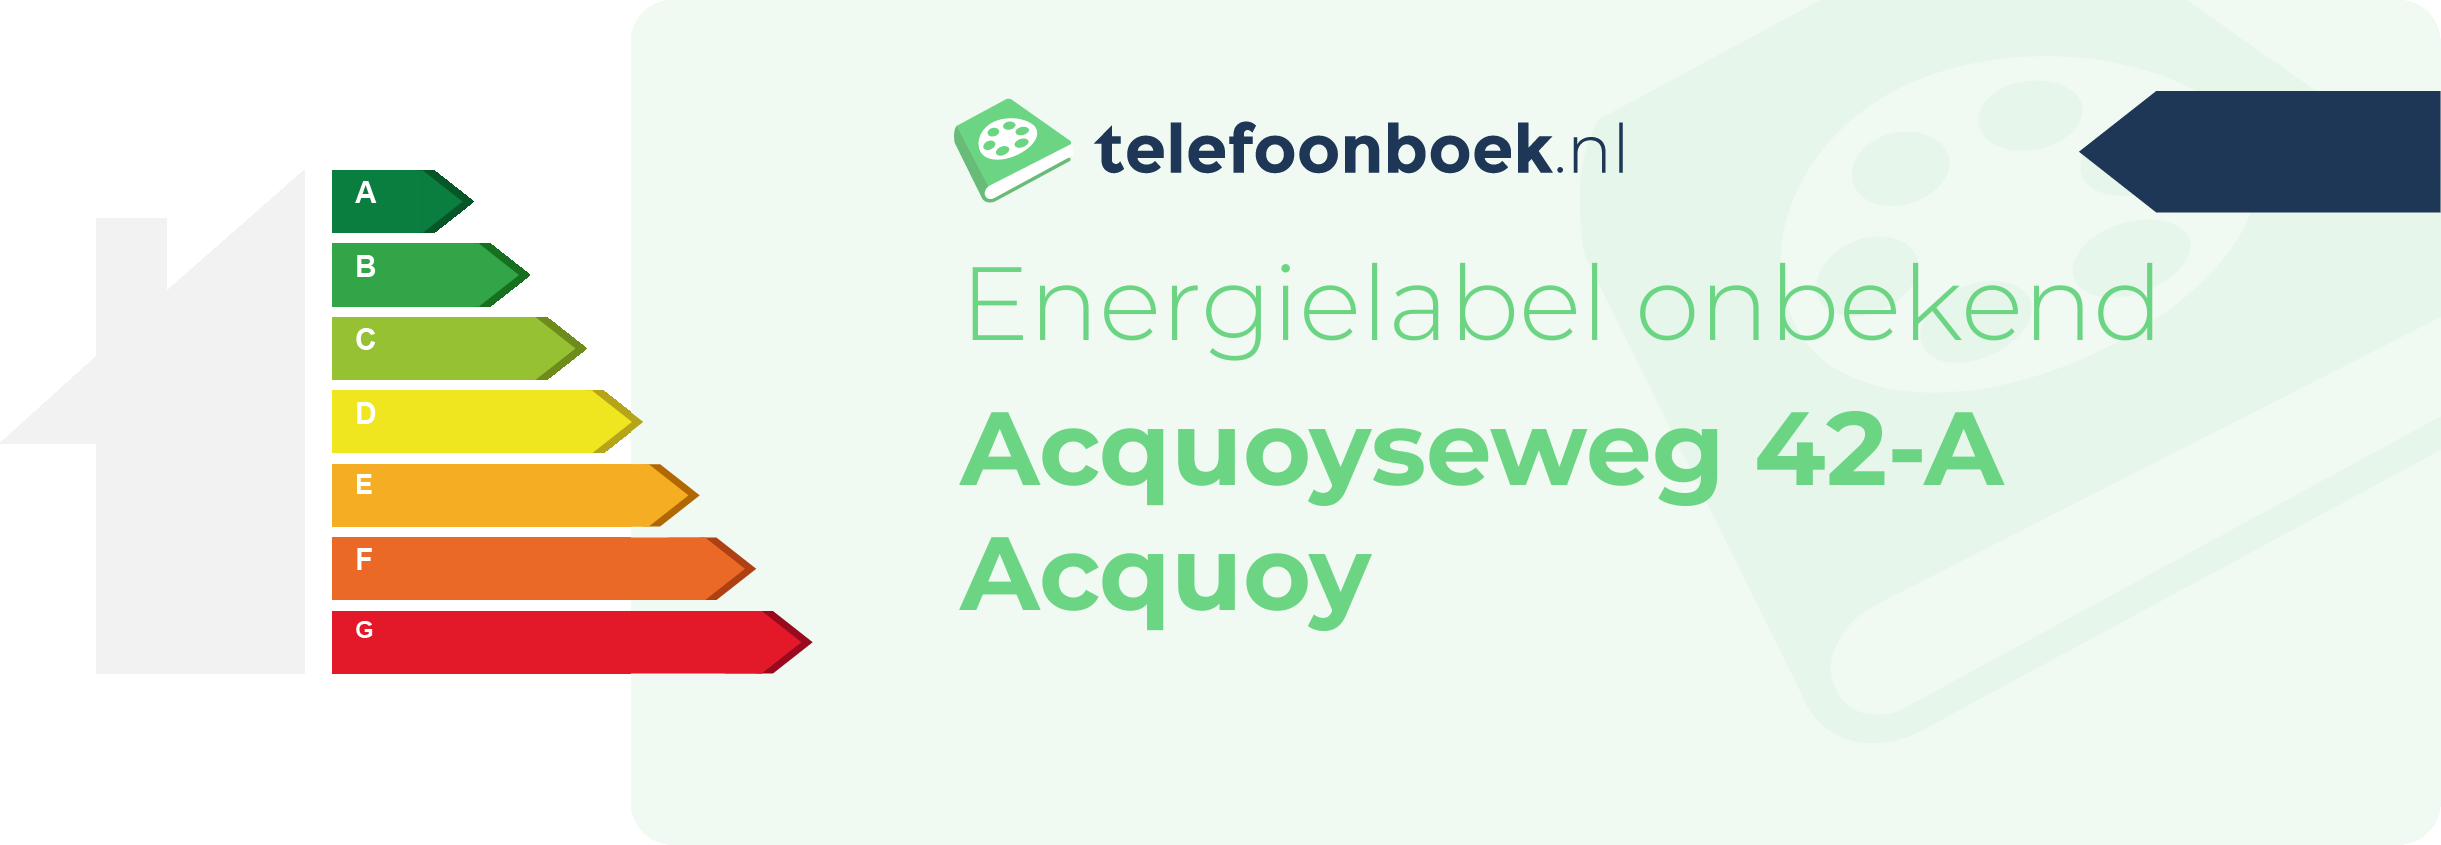 Energielabel Acquoyseweg 42-A Acquoy